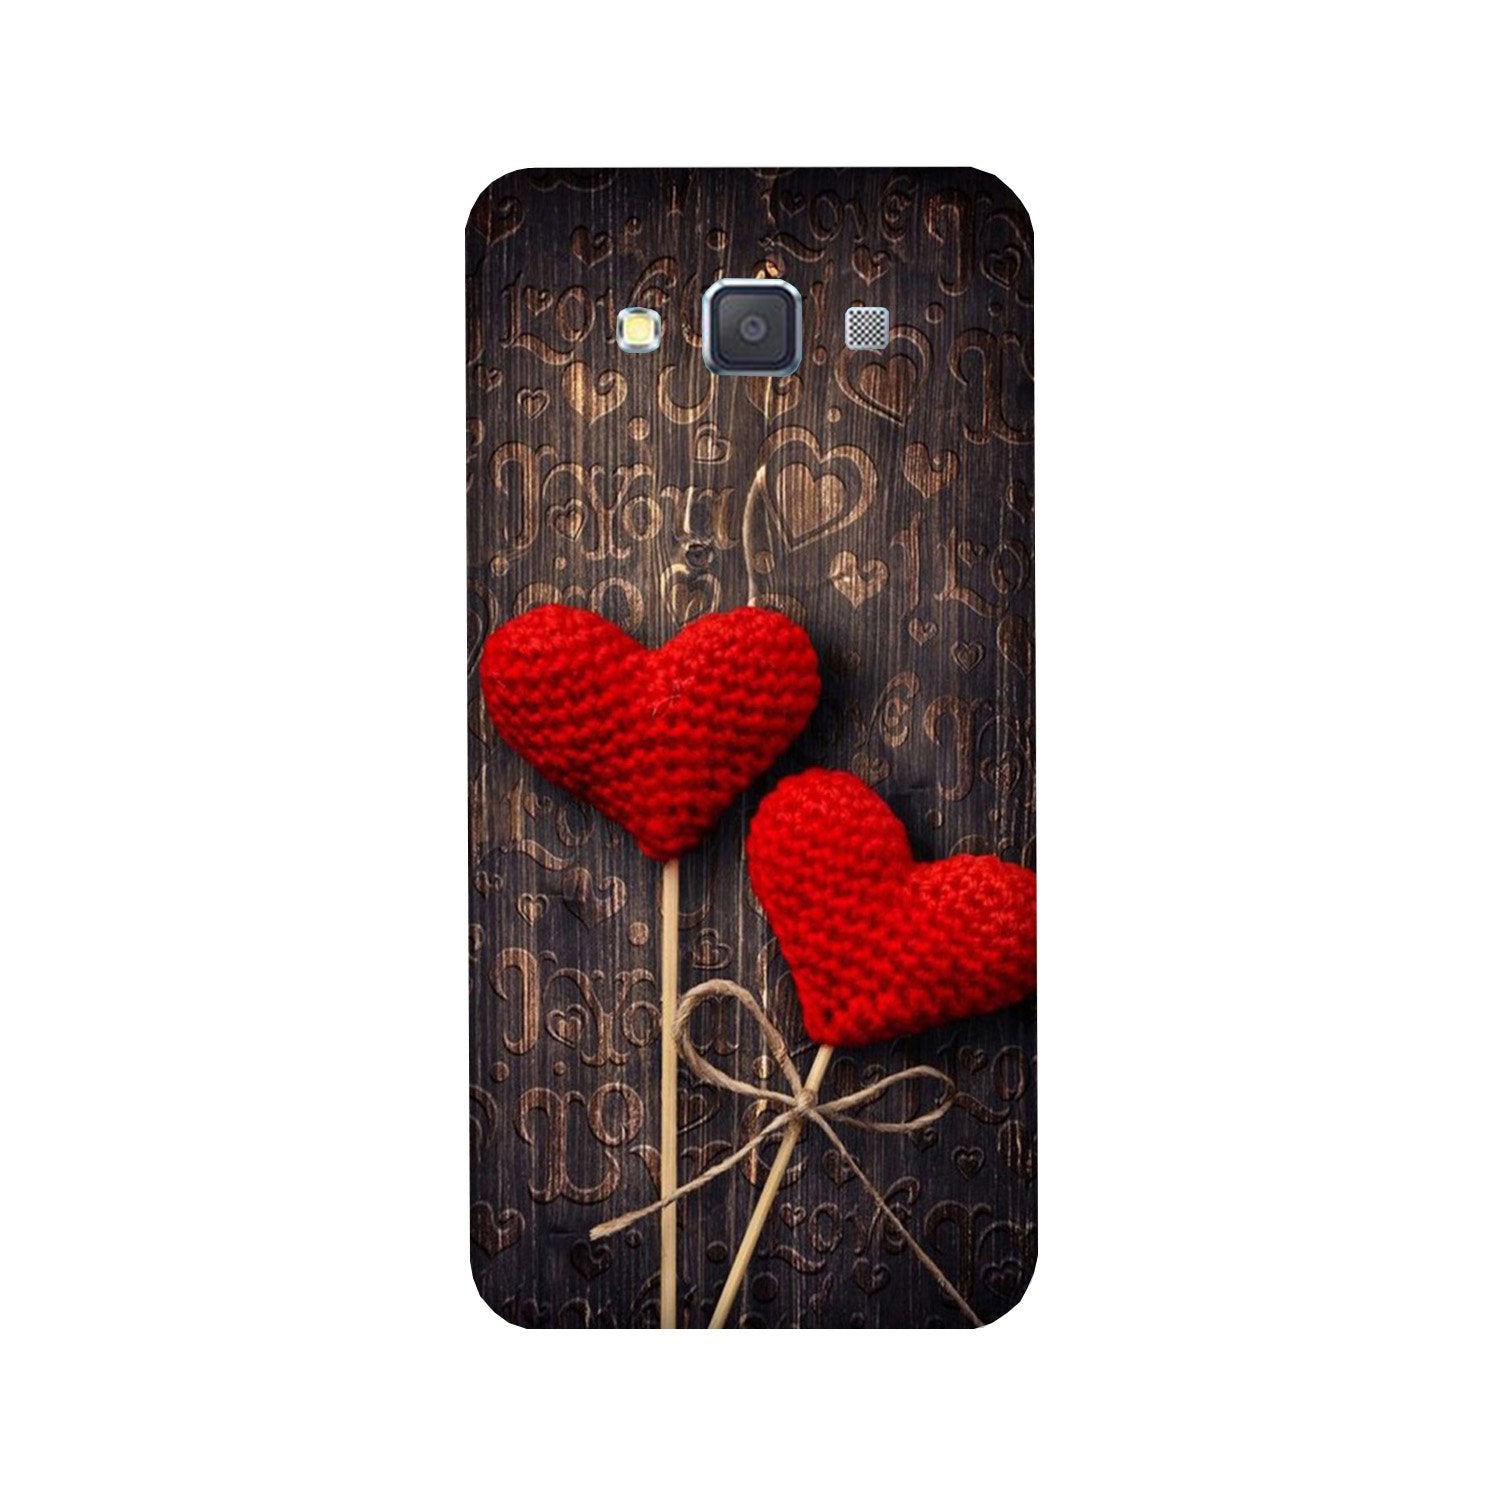 Red Hearts Case for Galaxy J7 (2016)